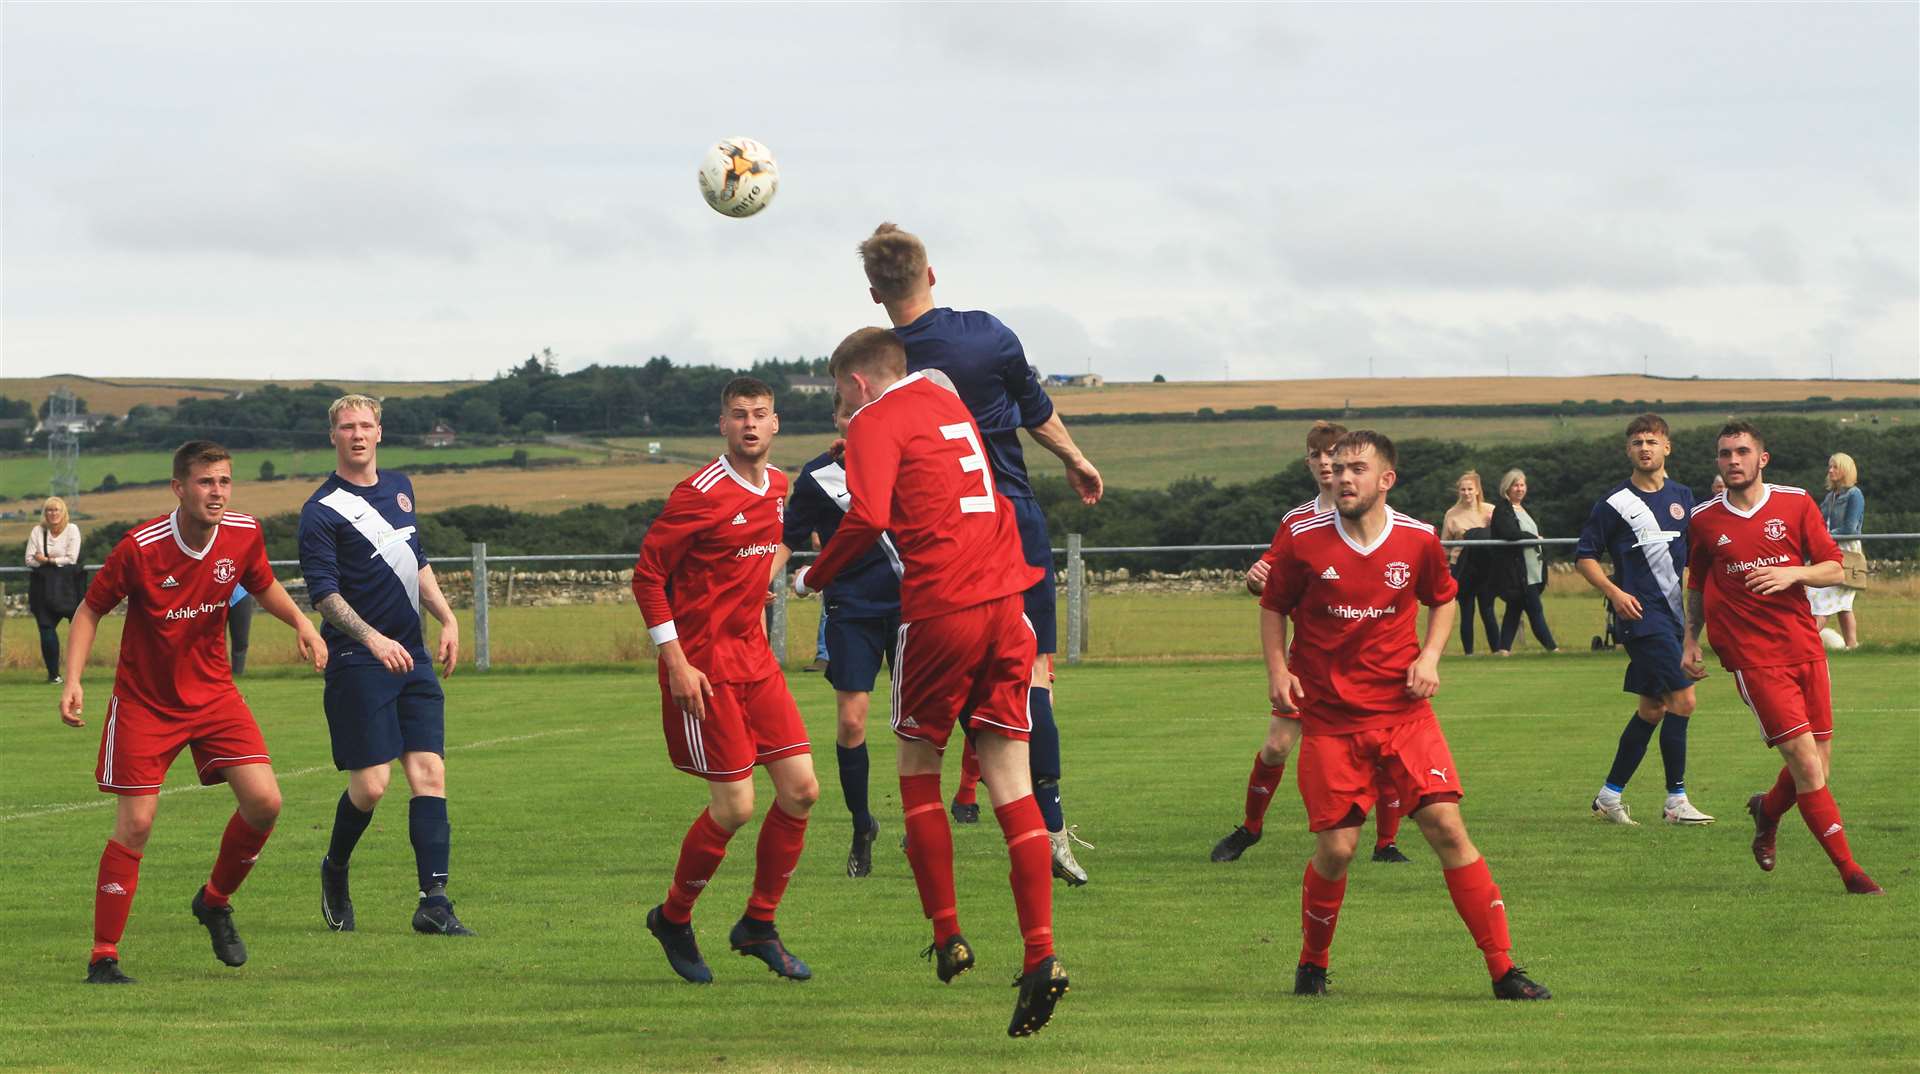 Halkirk United on the attack against Thurso at Morrison Park on the opening day of the North Caledonian League campaign.